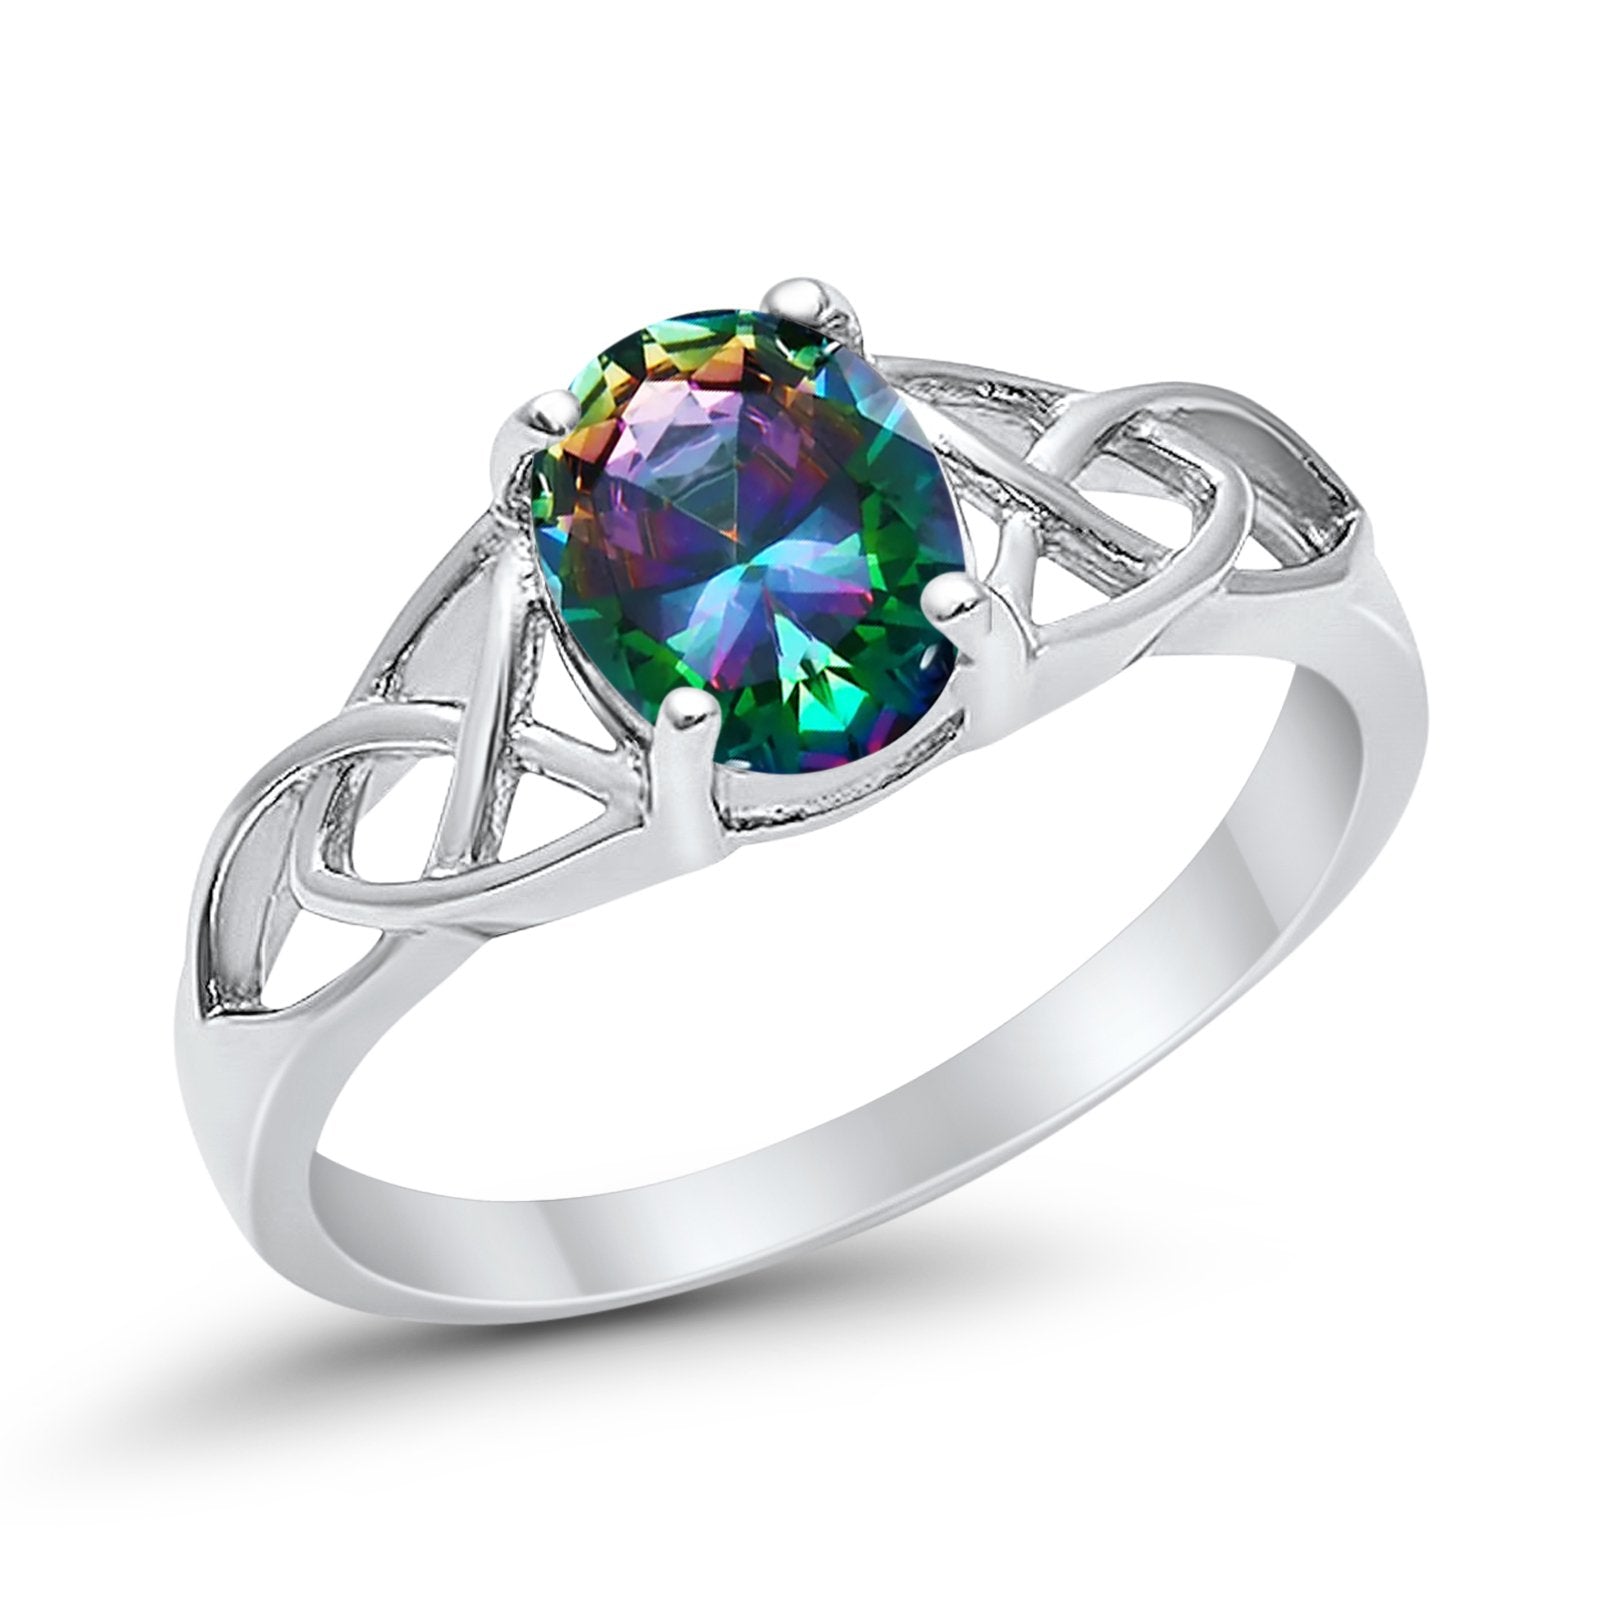 Halo Vintage Style Wedding Ring Simulated Rainbow CZ 925 Sterling Silver